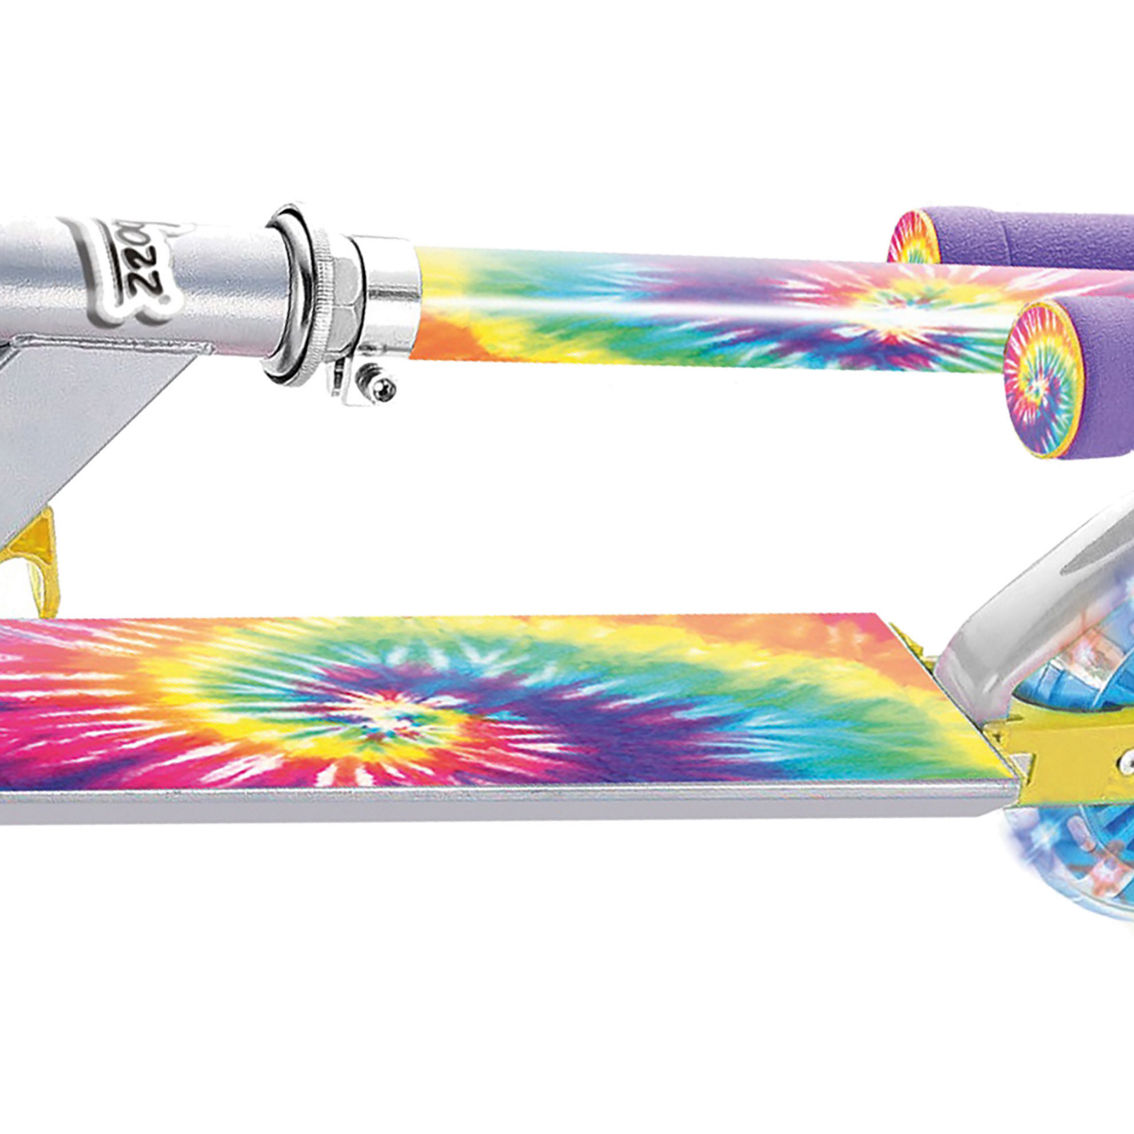 Tie Dye Scooter with Flashing Wheels - Image 5 of 5